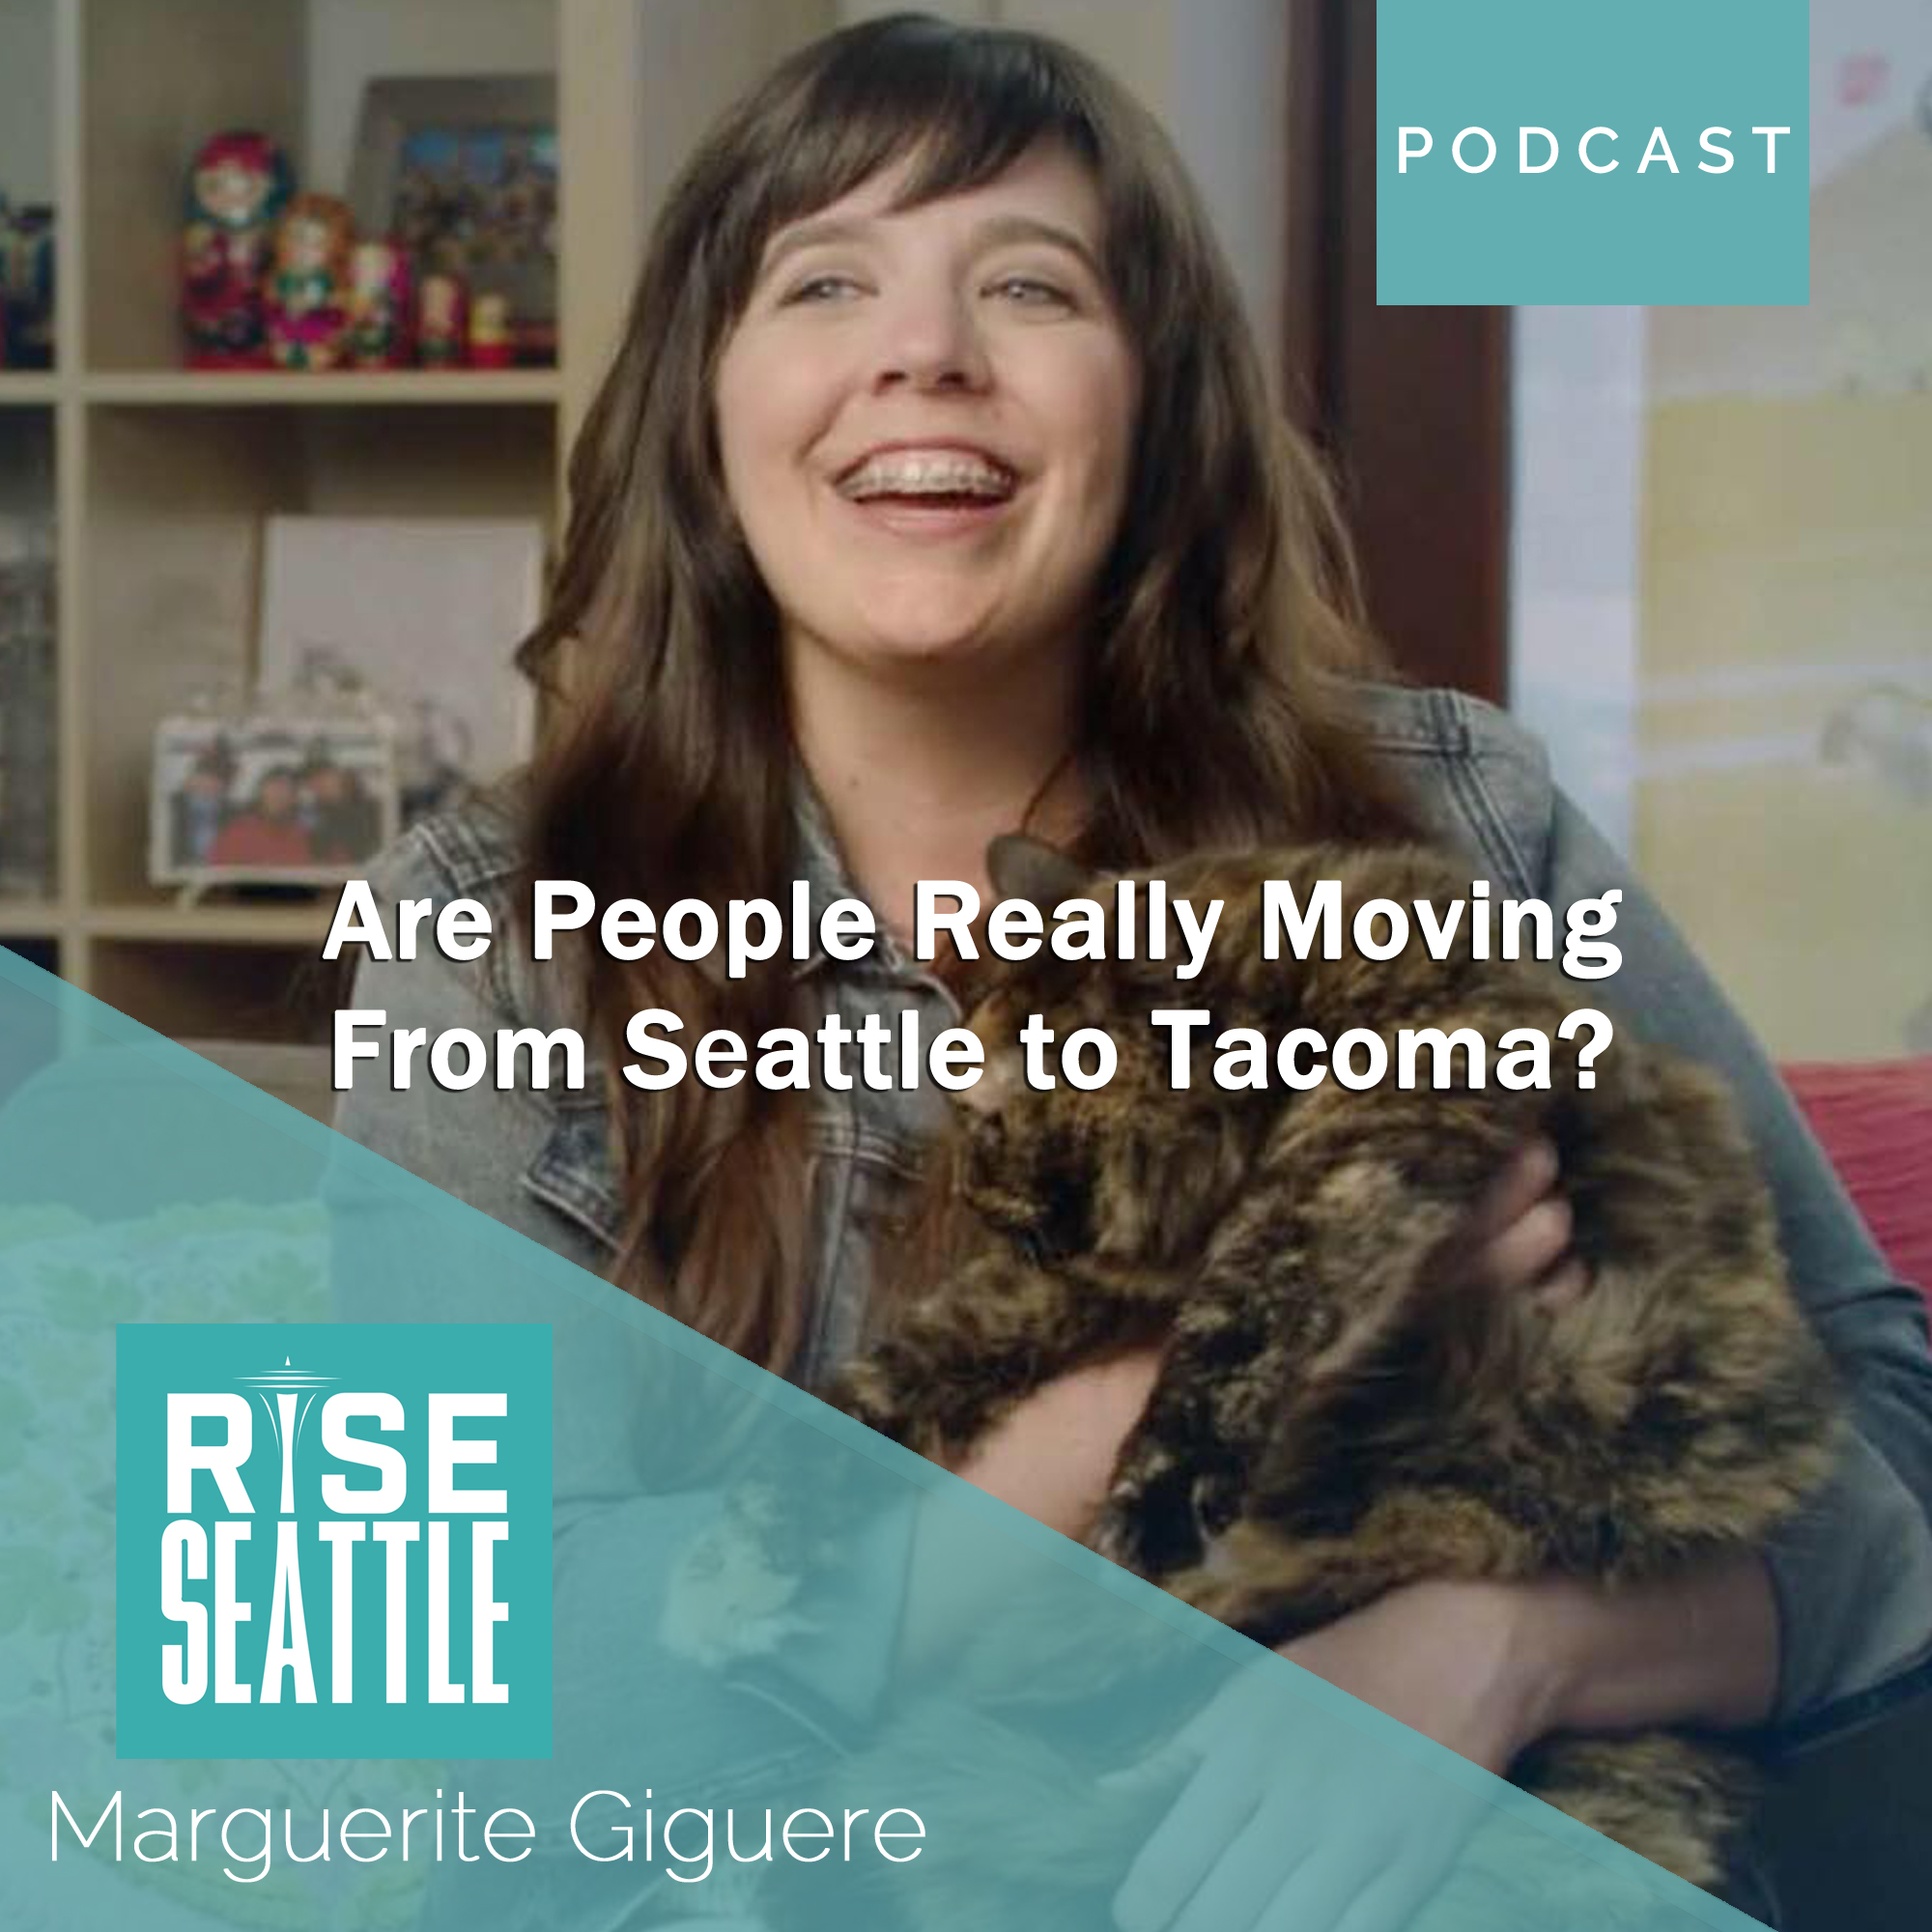 S1.E9 Marguerite Giguere: Are People Really Moving From Seattle to Tacoma?